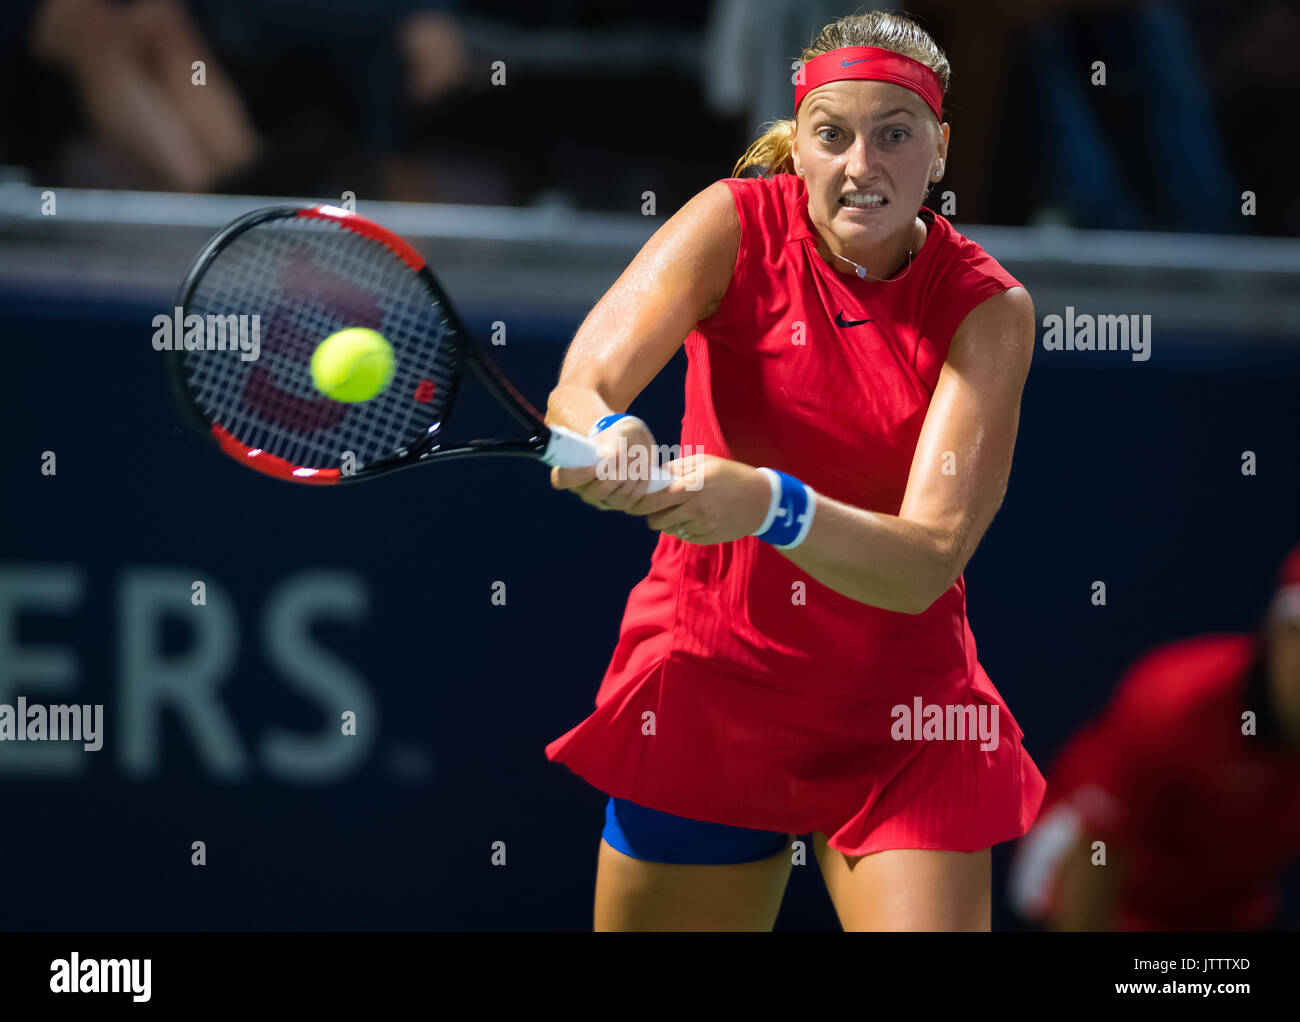 Toronto, Canada. 9 August, 2017. Petra Kvitova of the Czech Republic at the  2017 Rogers Cup WTA Premier 5 tennis tournament © Jimmie48  Photography/Alamy Live News Stock Photo - Alamy